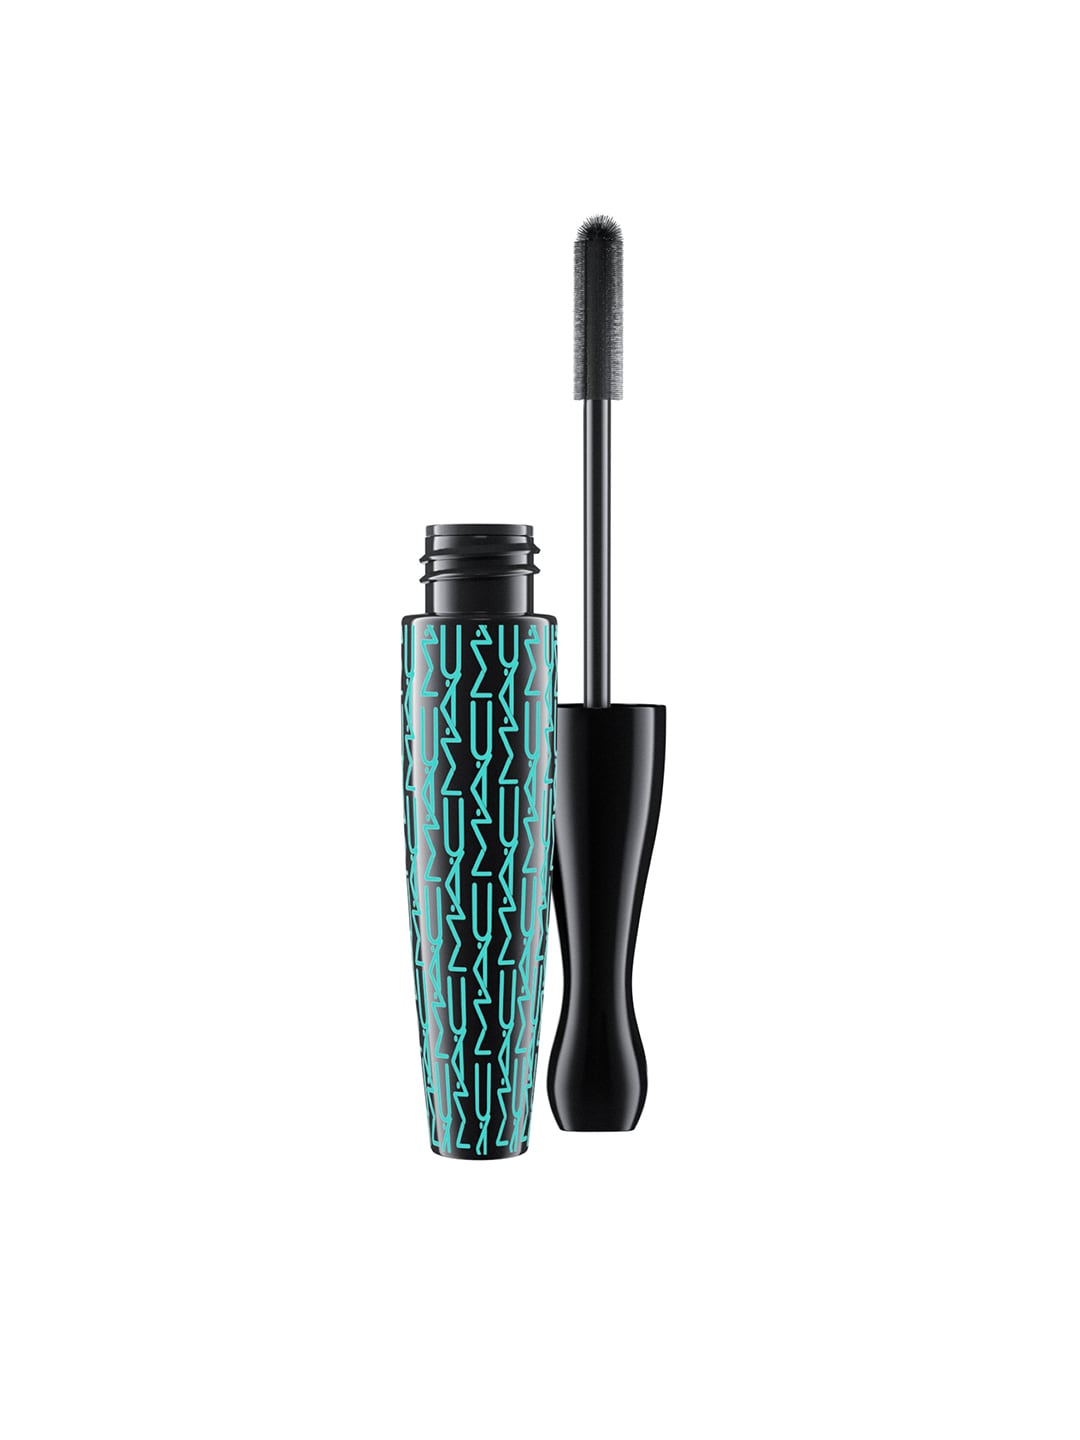 M.A.C. In Extreme Dimension Waterproof Mascara- Dimensional Black 13.39 g Price in India